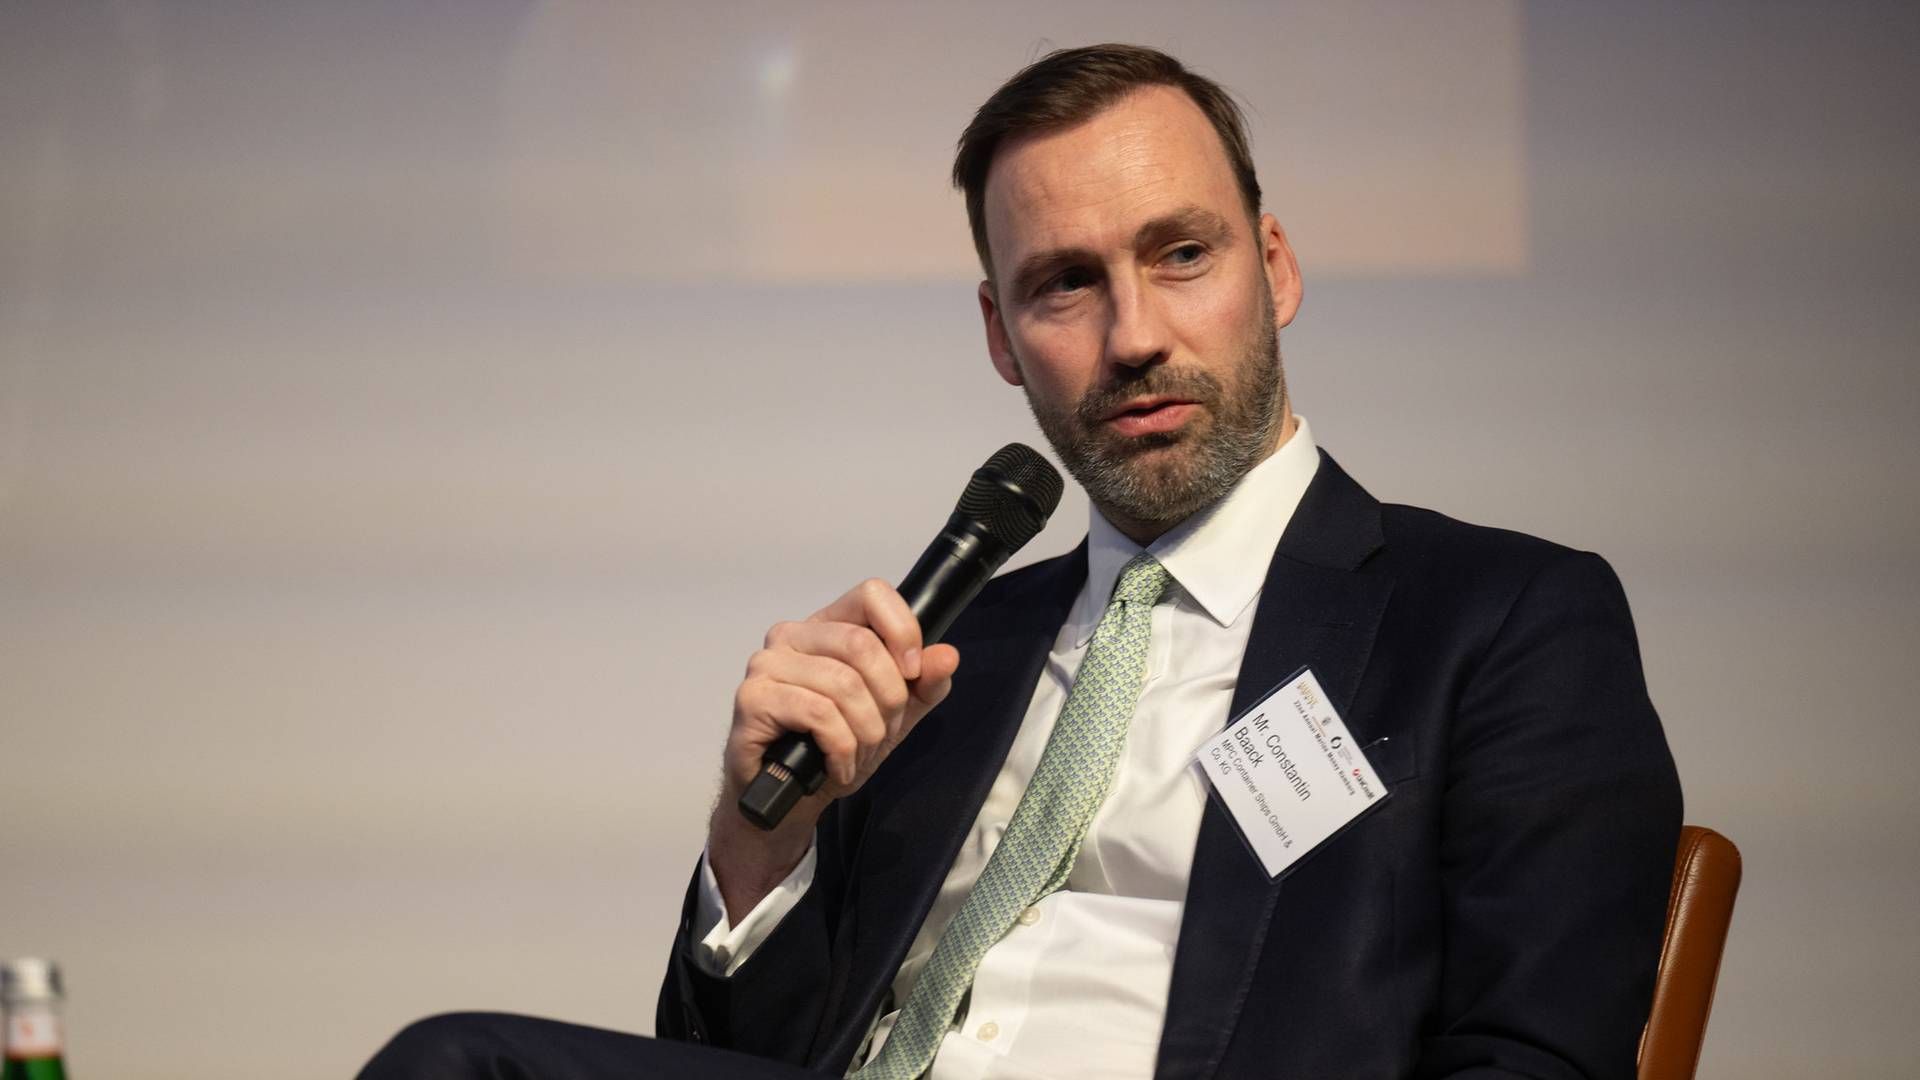 ”Two years for smaller ships, which is what we see right now, is definitely something we haven’t seen for the last 8-12 months, if at all,” says Constantin Baack, CEO of MPC Container Ships. | Photo: Marine Money